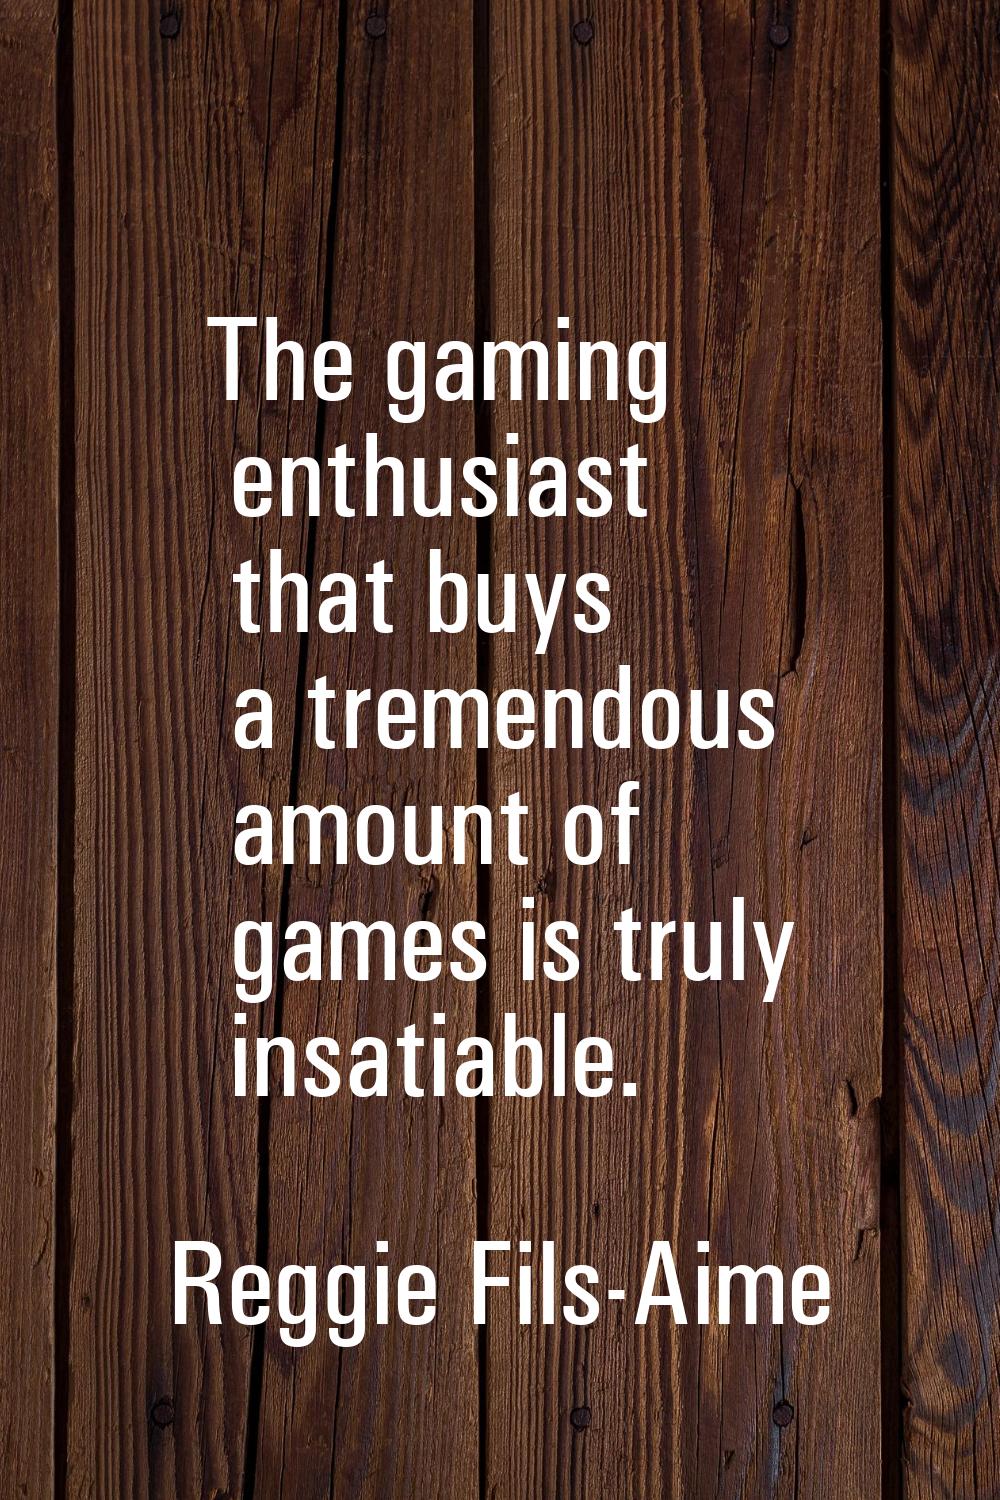 The gaming enthusiast that buys a tremendous amount of games is truly insatiable.